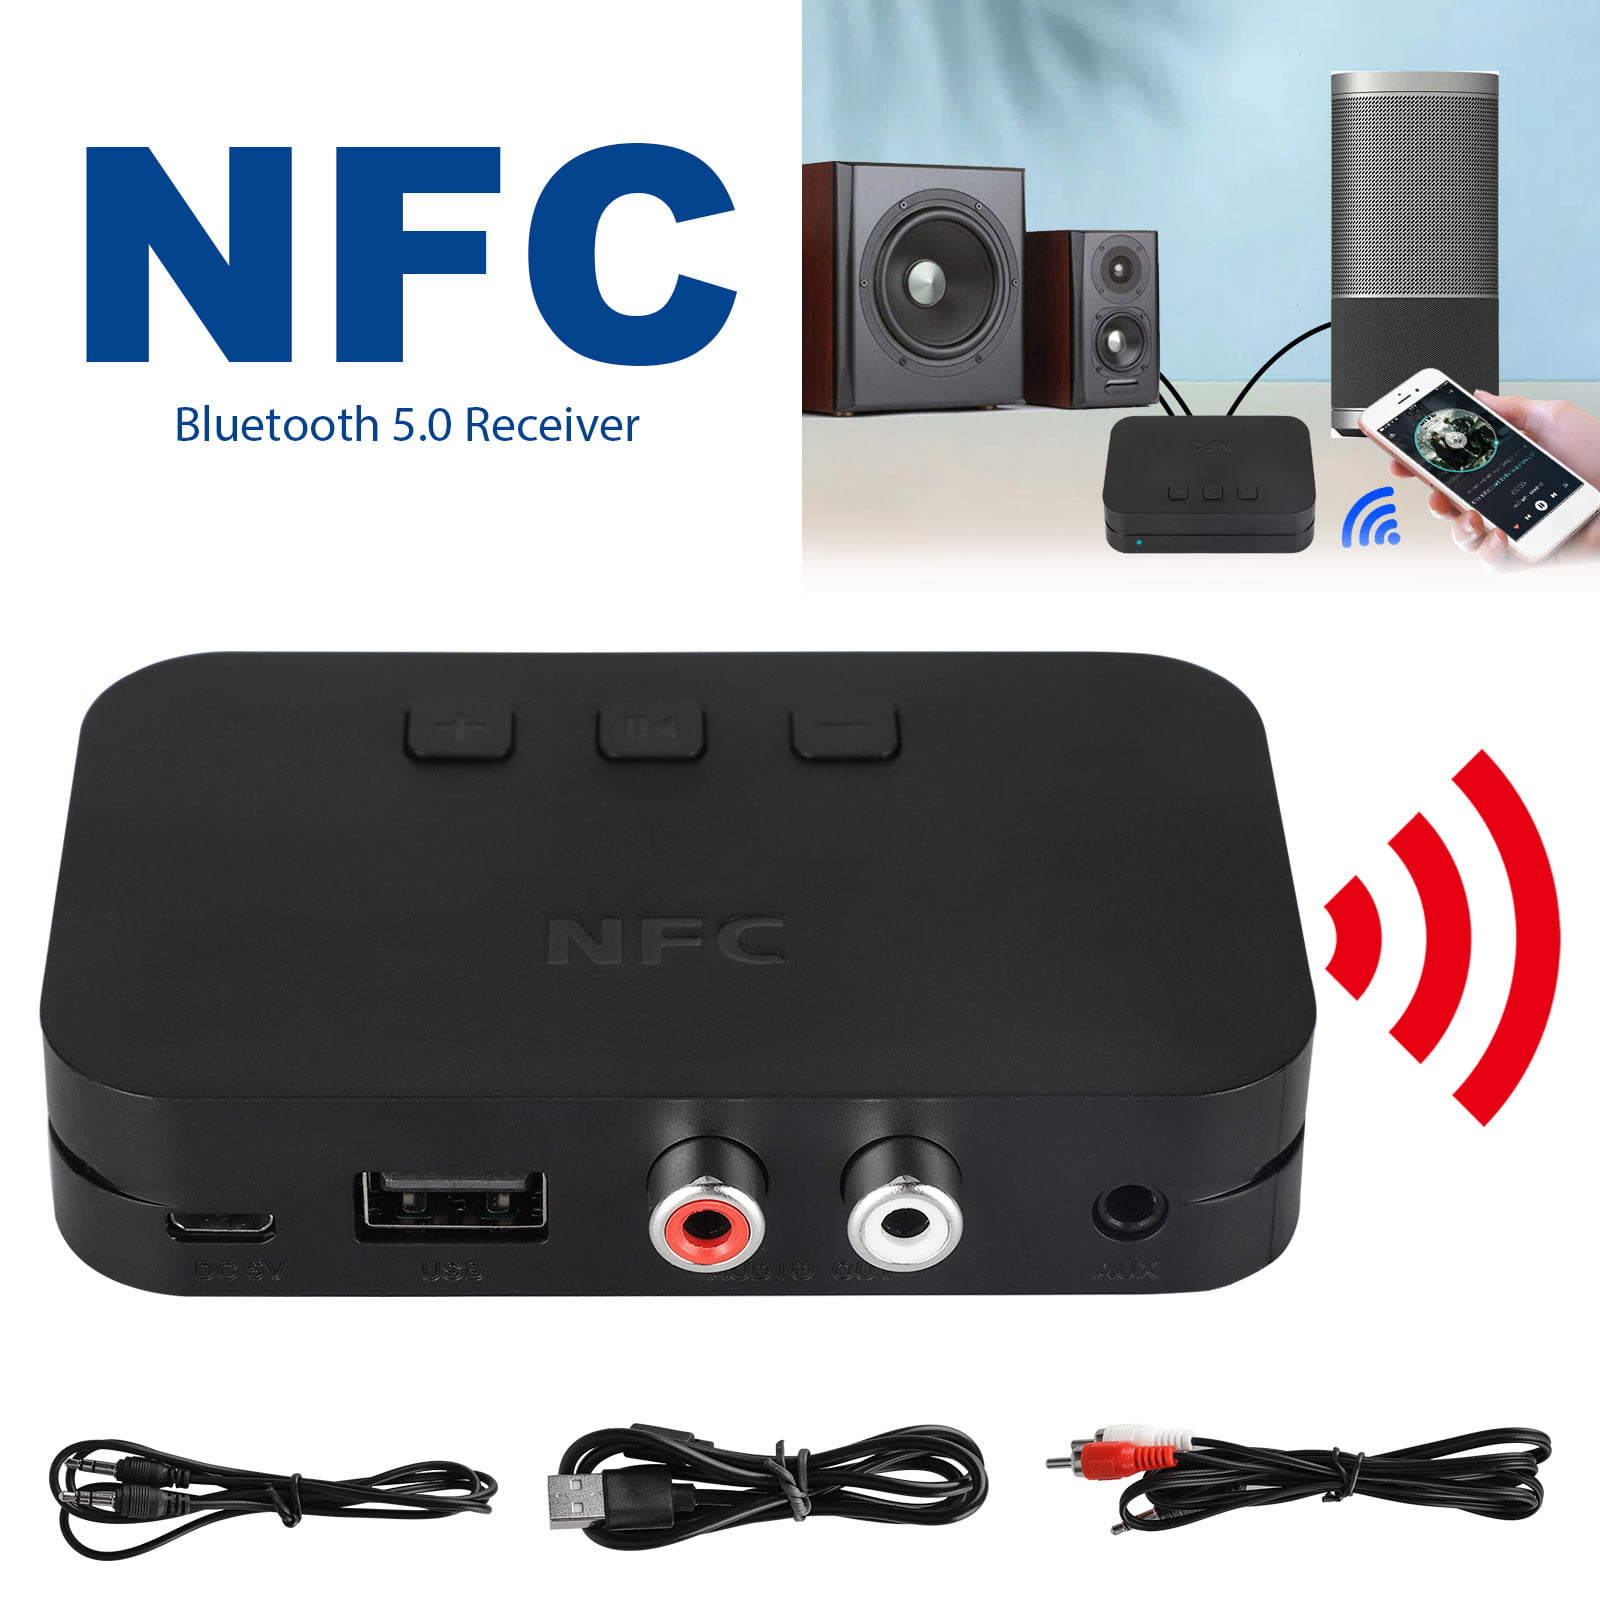 Bluetooth 5.0 Receiver, NFC Wireless Audio Adapter, Low